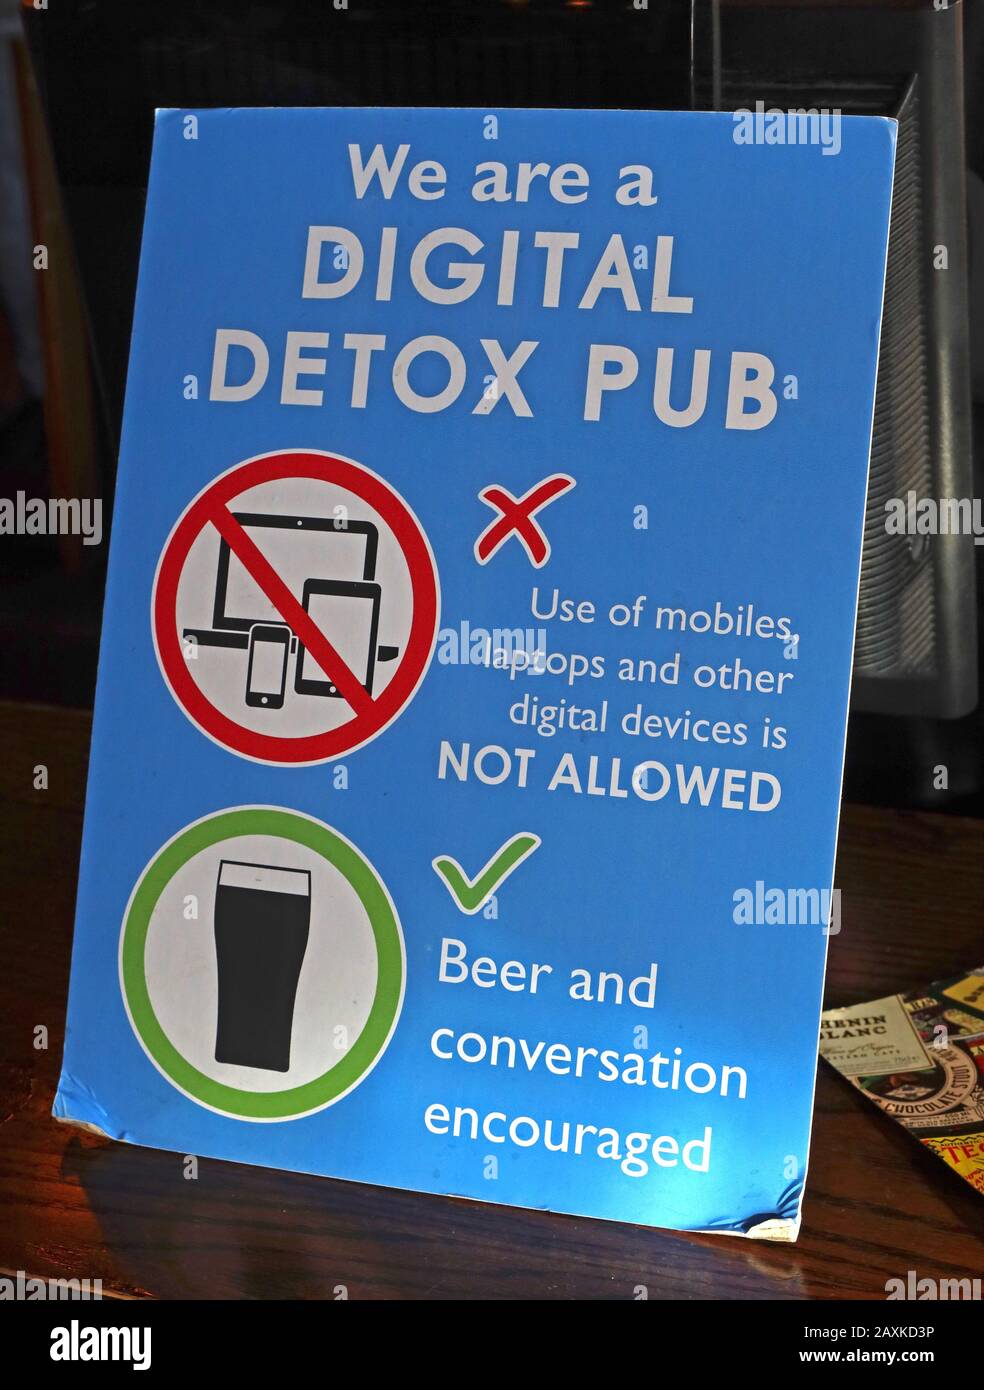 We Are a digital detox pub, Sam Smiths,use of mobiles,laptops and other digital devices,not allowed,beer and conversation encouraged,Angel Rotherhithe Stock Photo